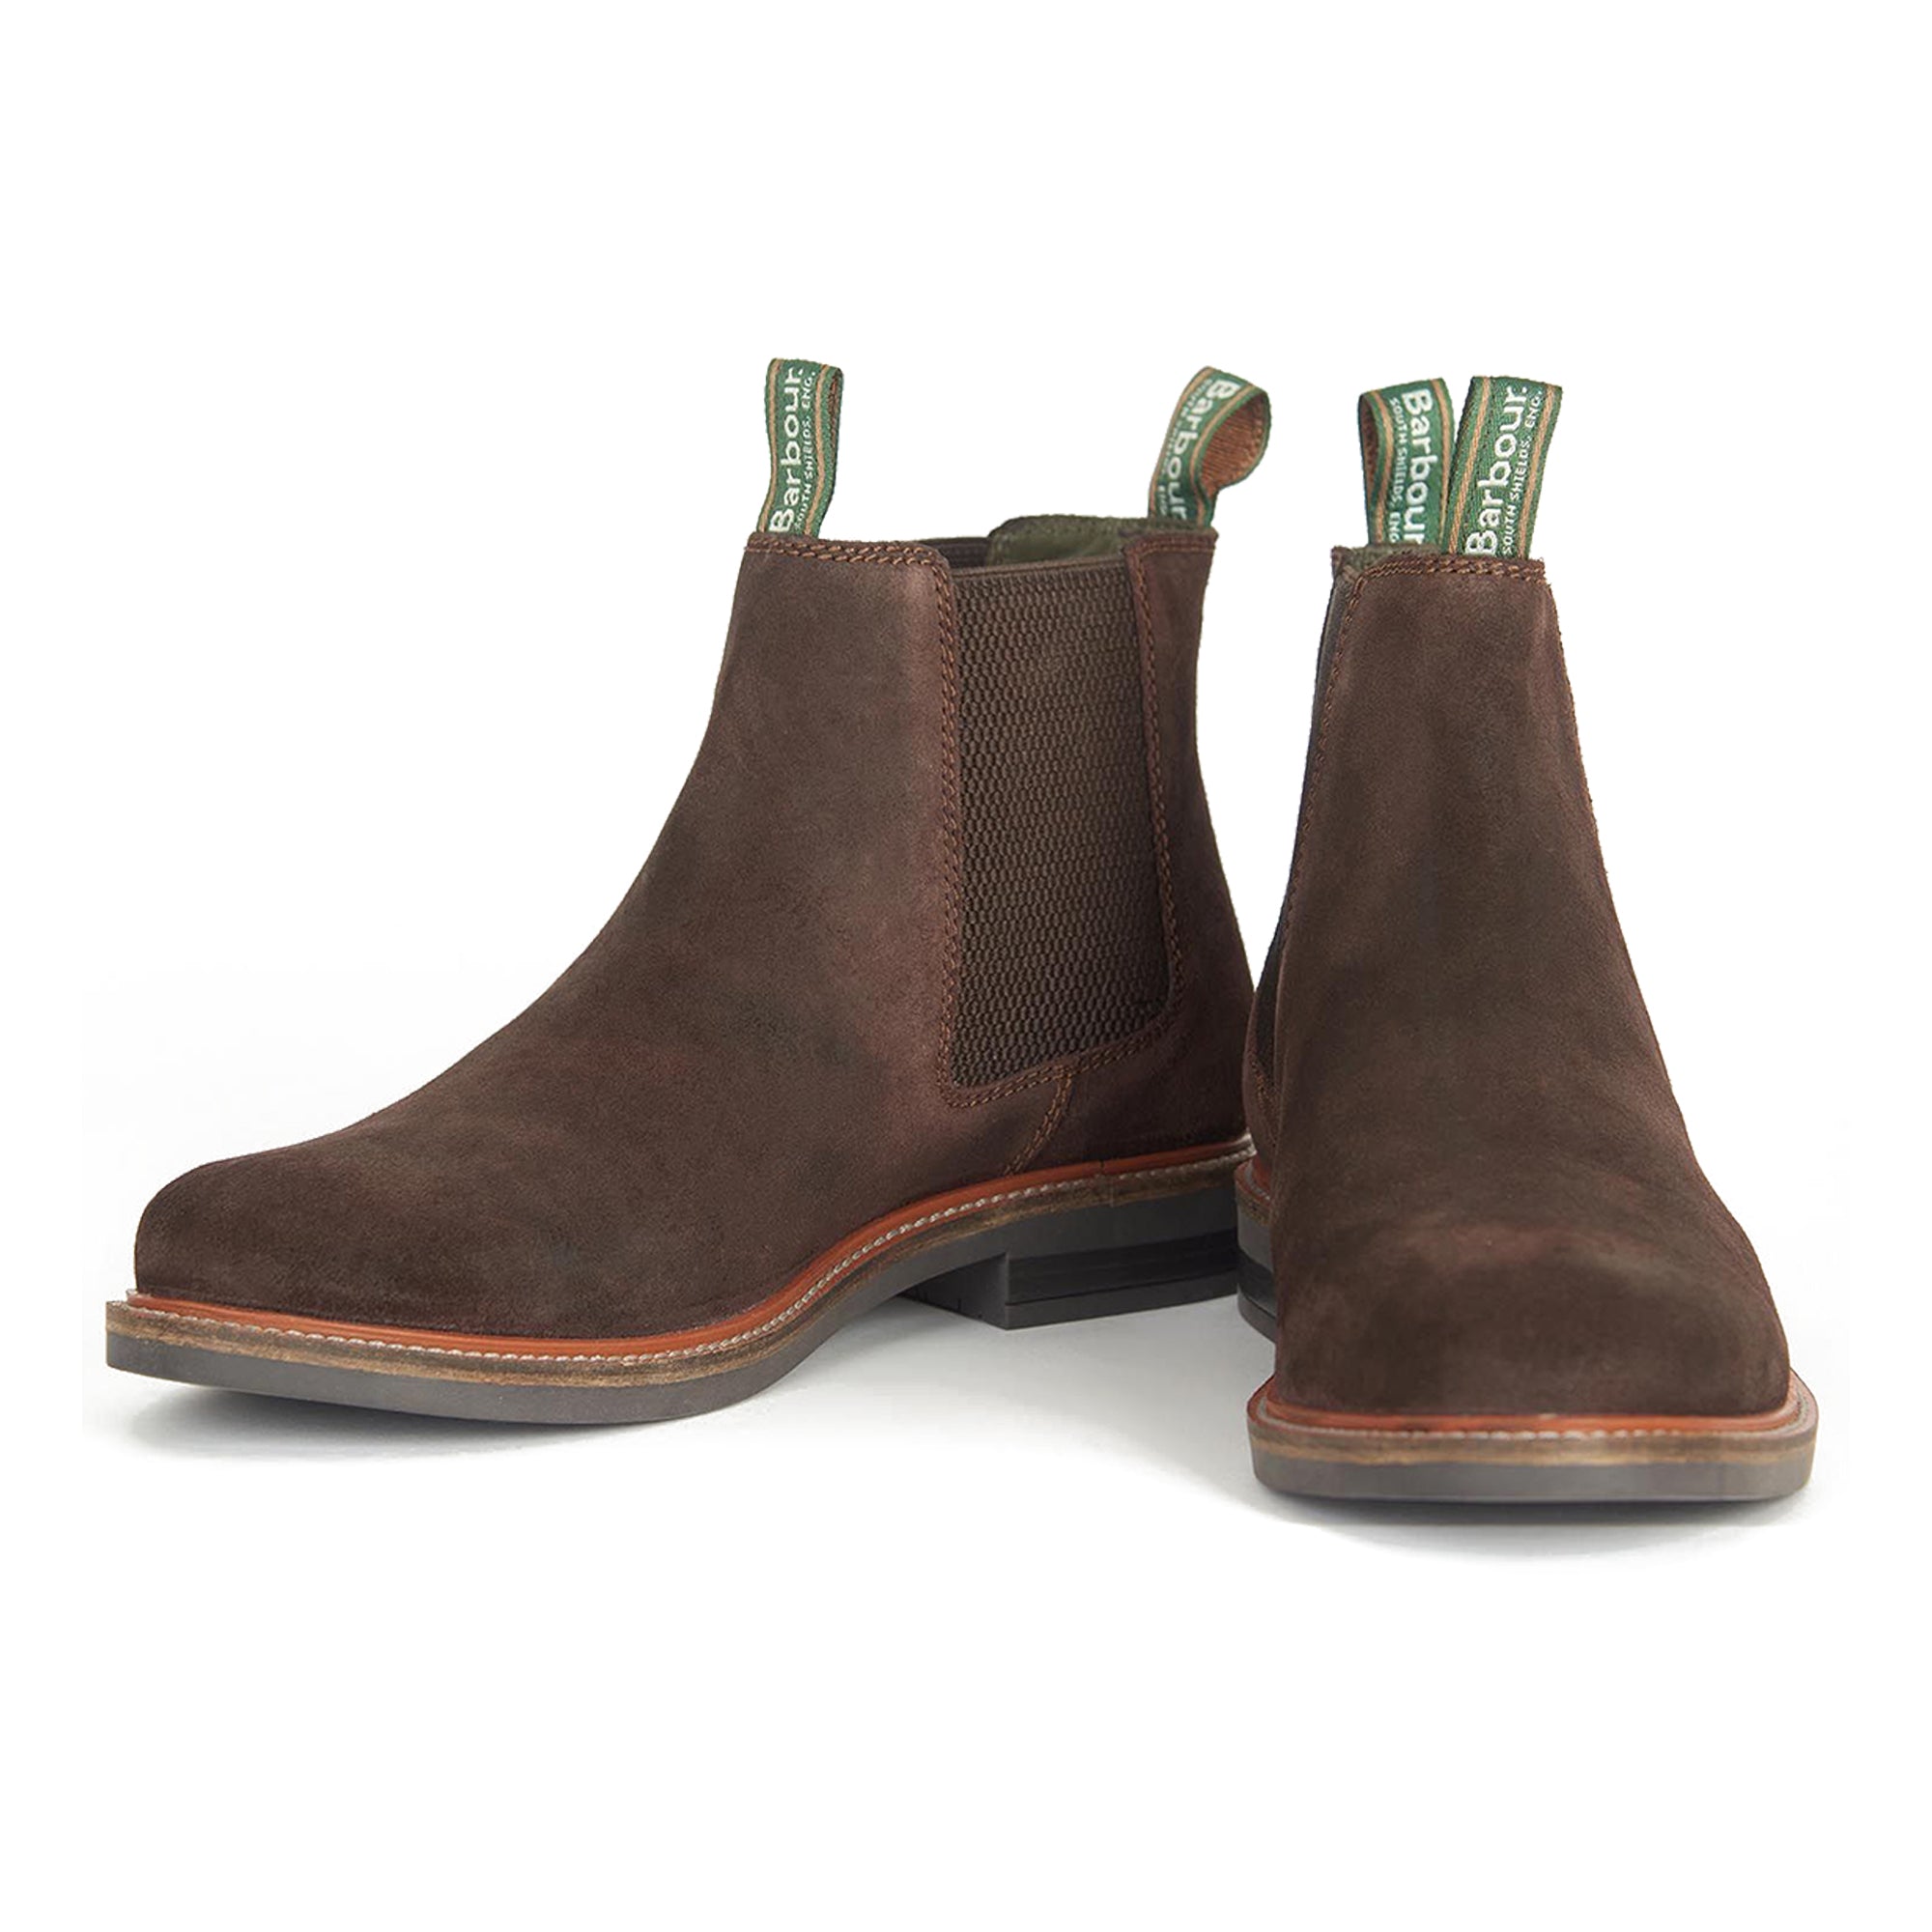 Barbour Farsley Chelsea Boot - Choco Suede